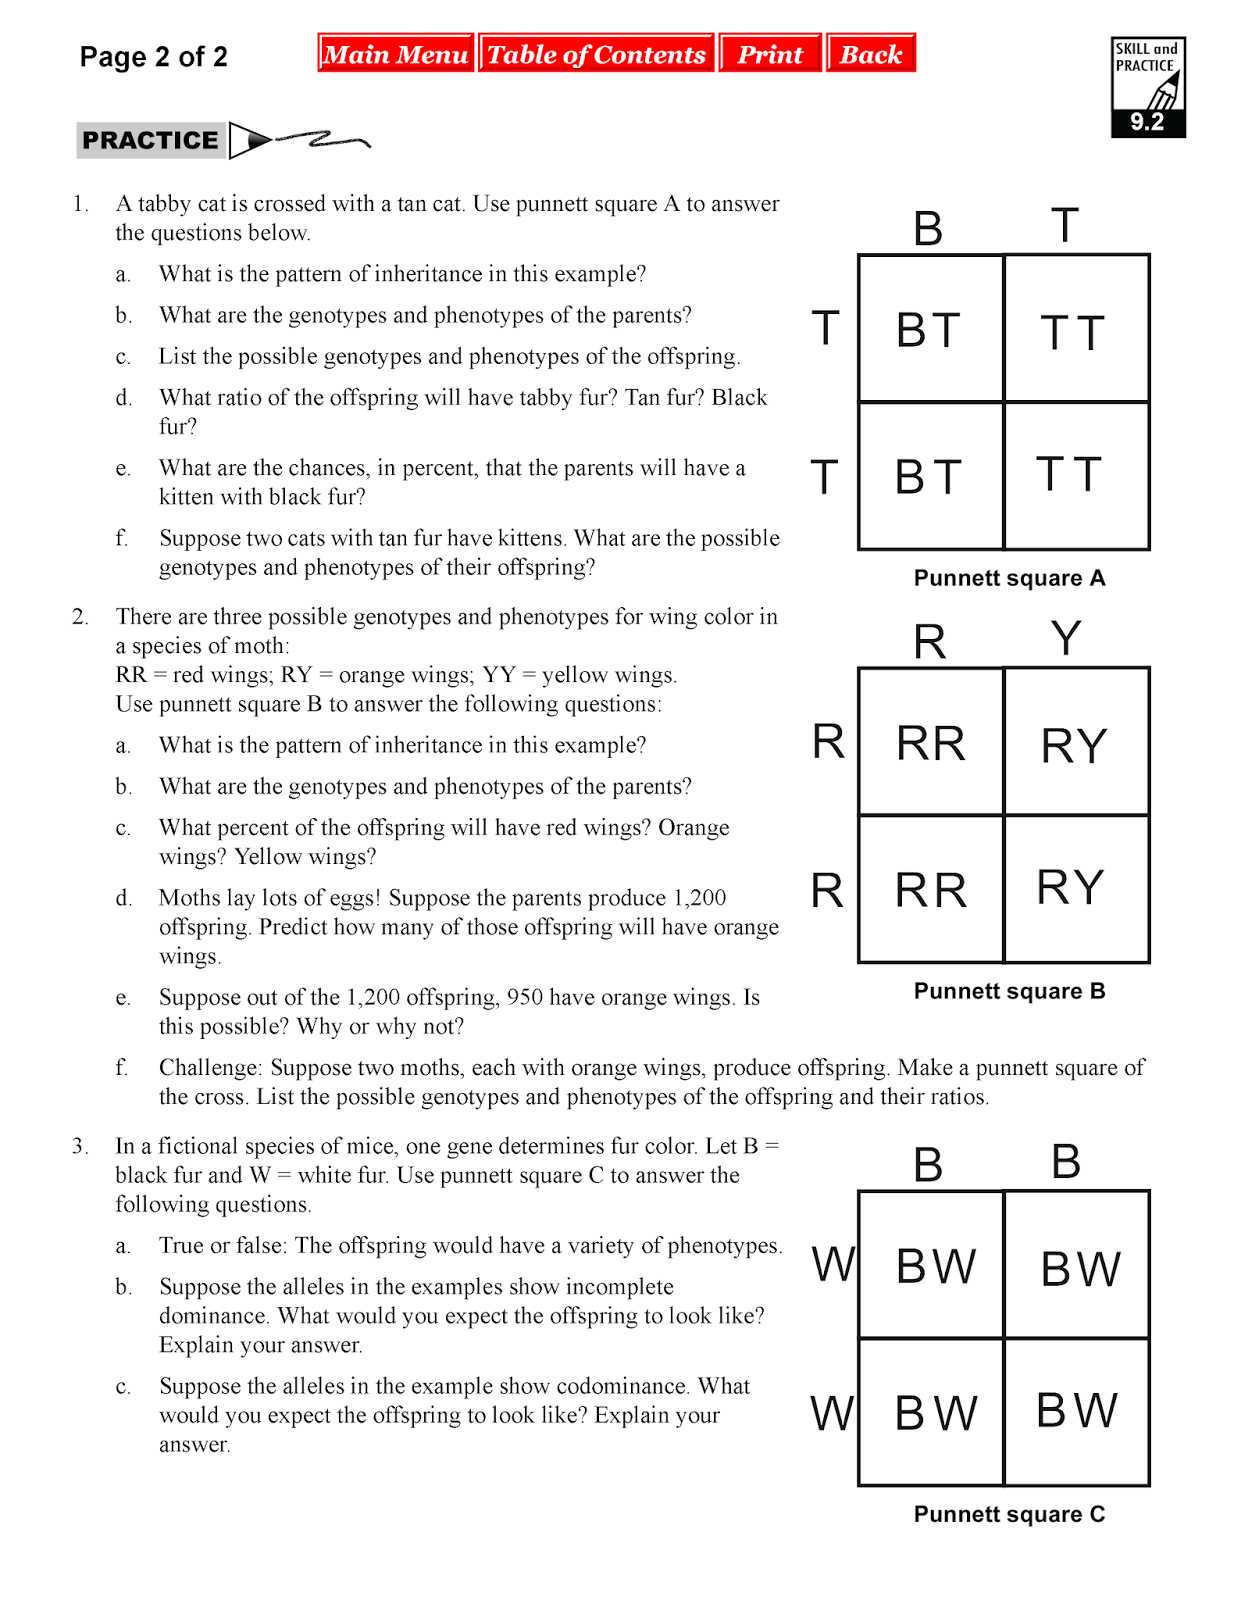 Codominance Worksheet Blood Types Along with 41 Codominance Worksheet Blood Types Answers 16 Best